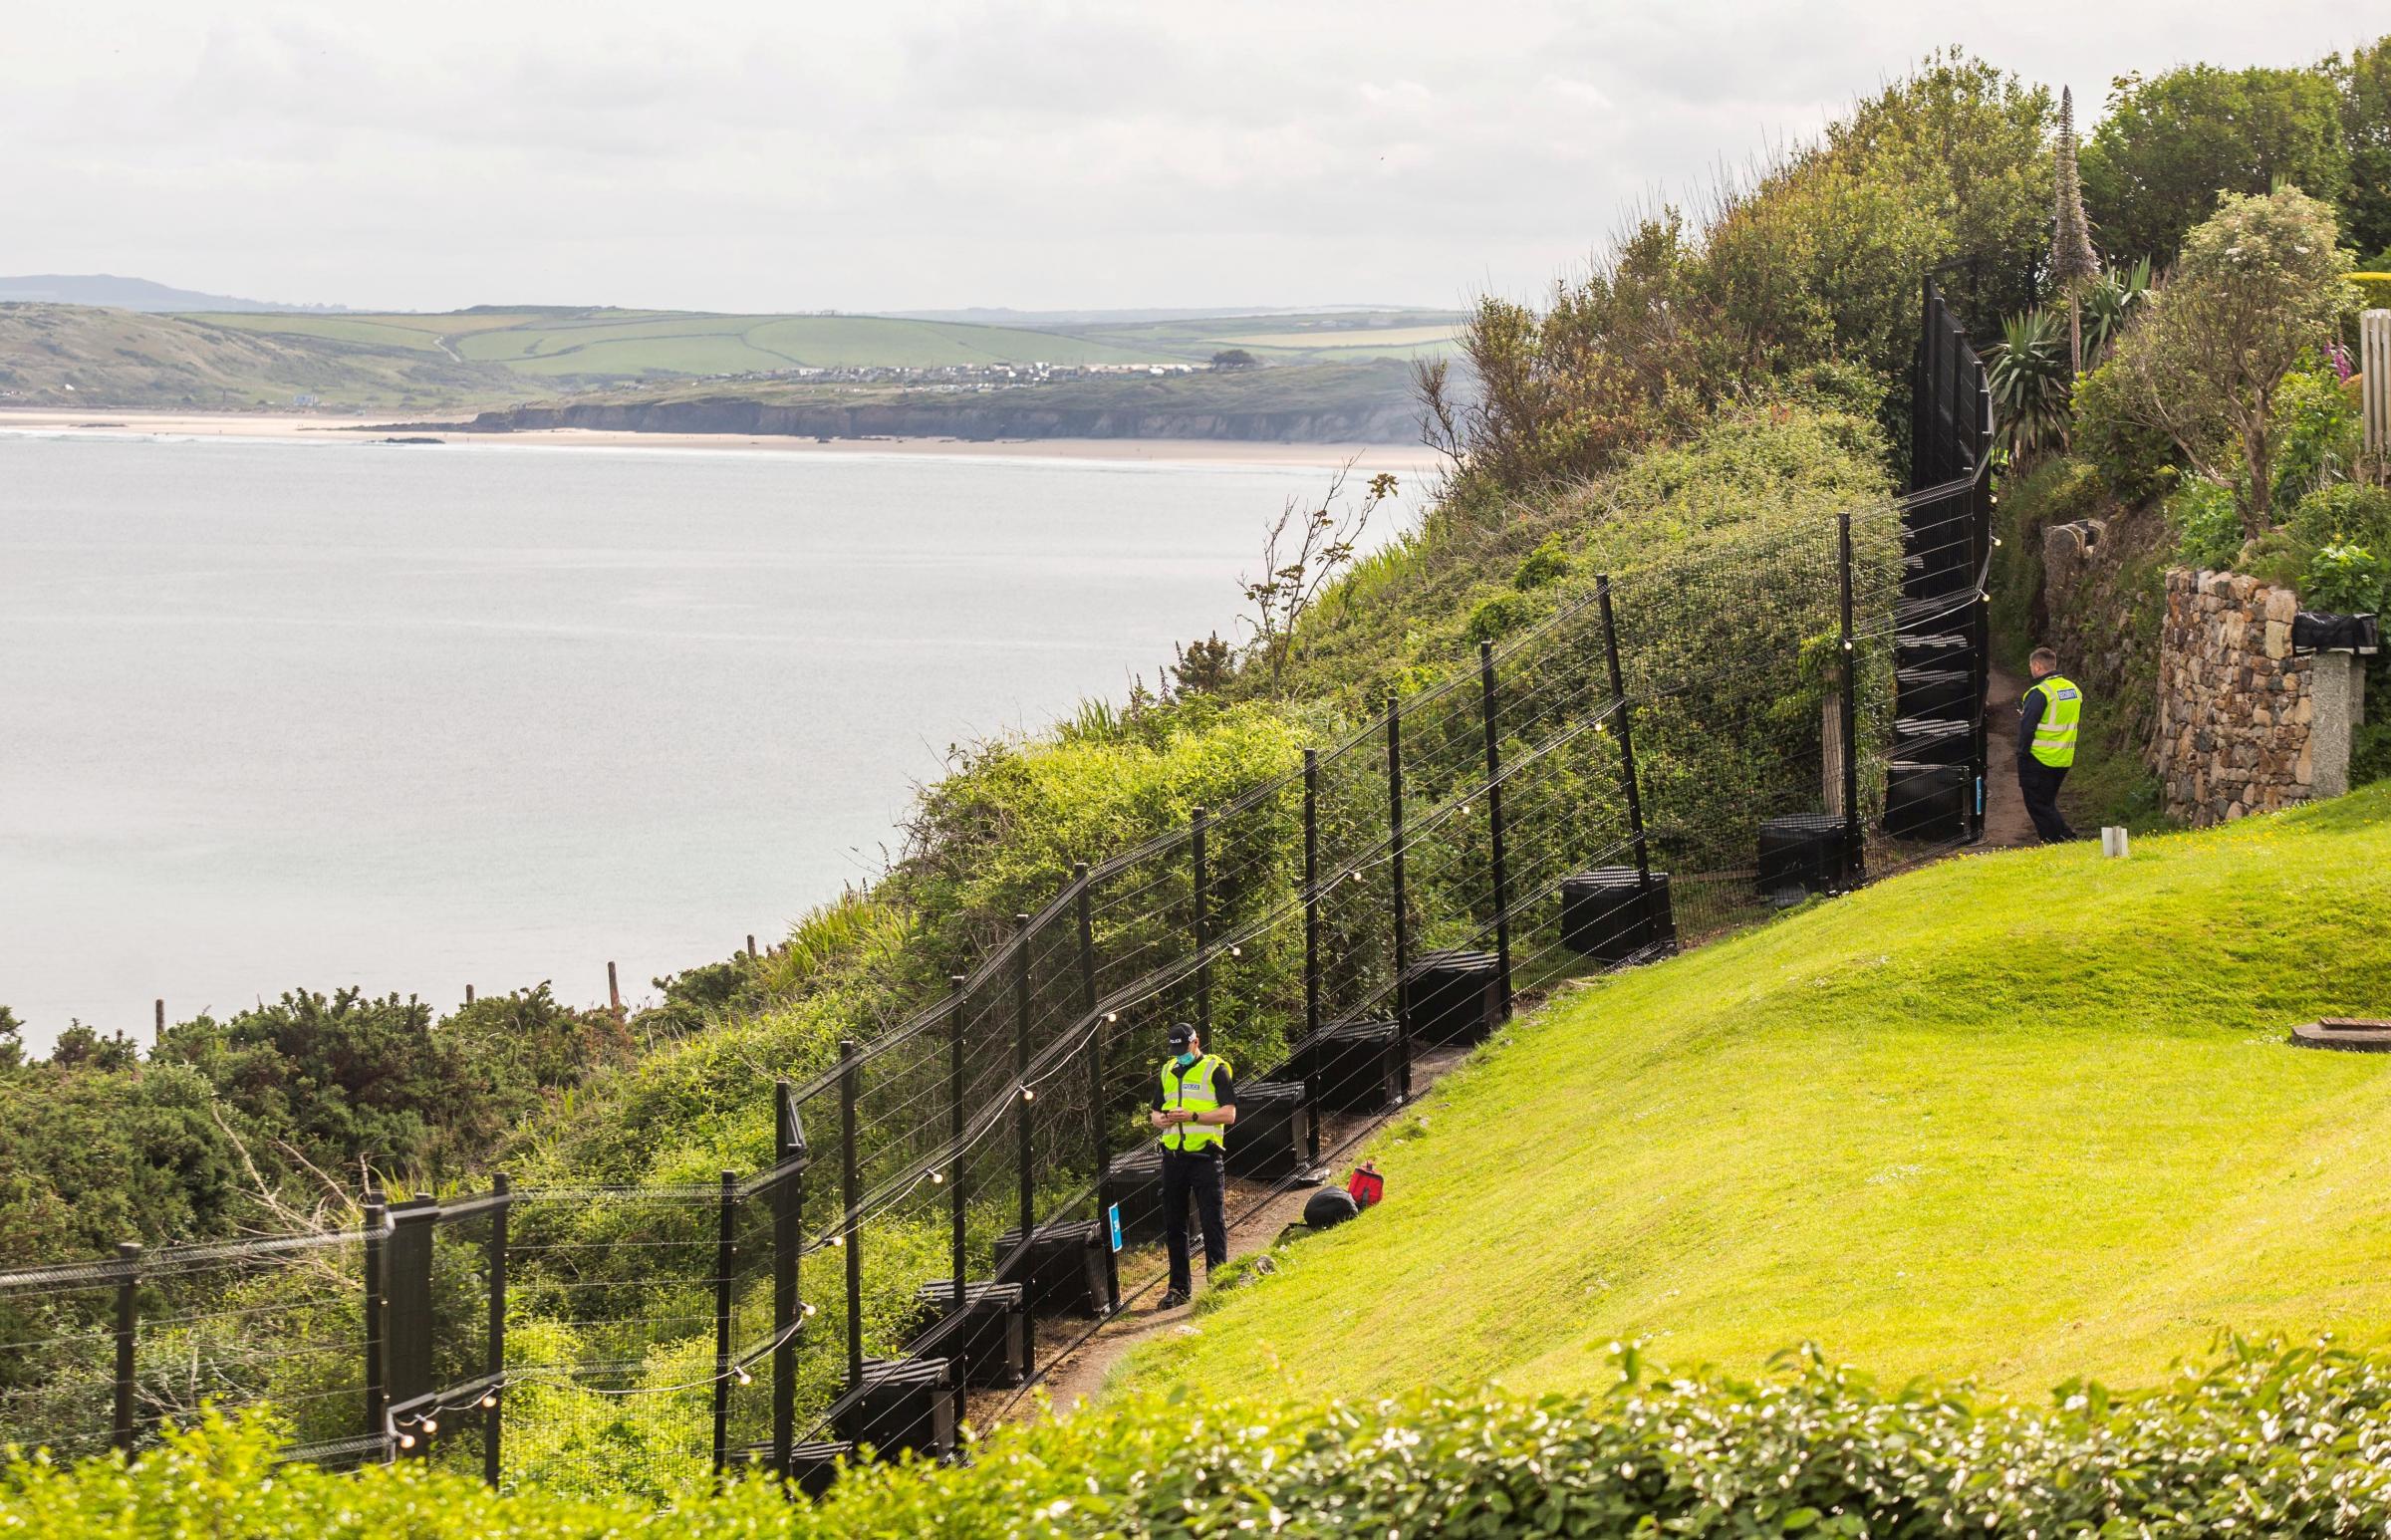 A heavy security fence around the grounds of the Tregenna Castle. Picture: SWNS